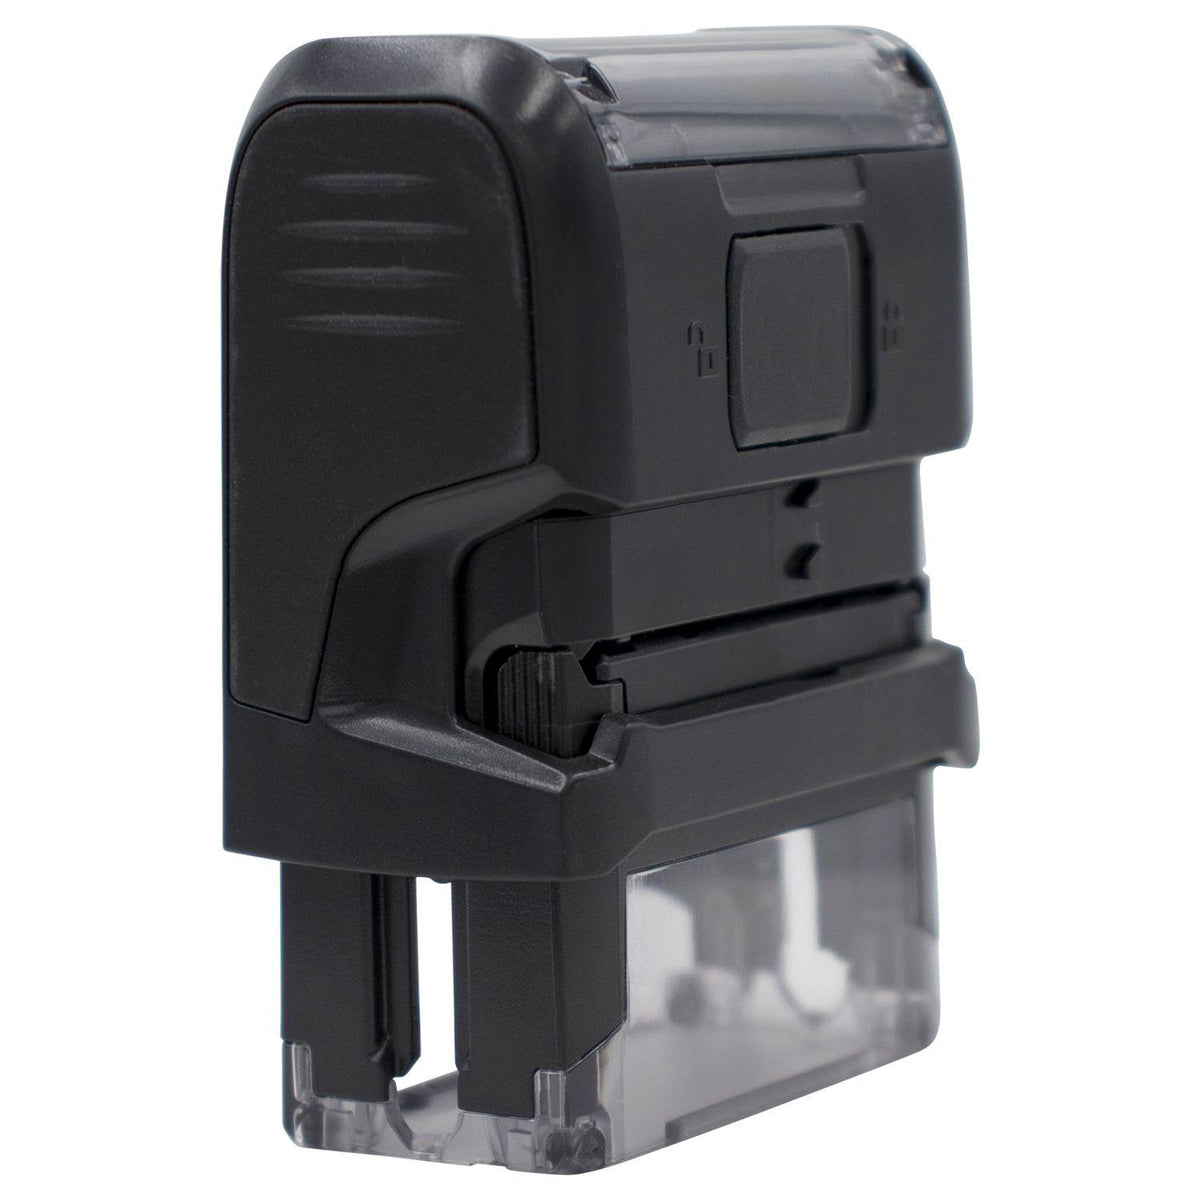 Large Self Inking Closed Stamp Back View